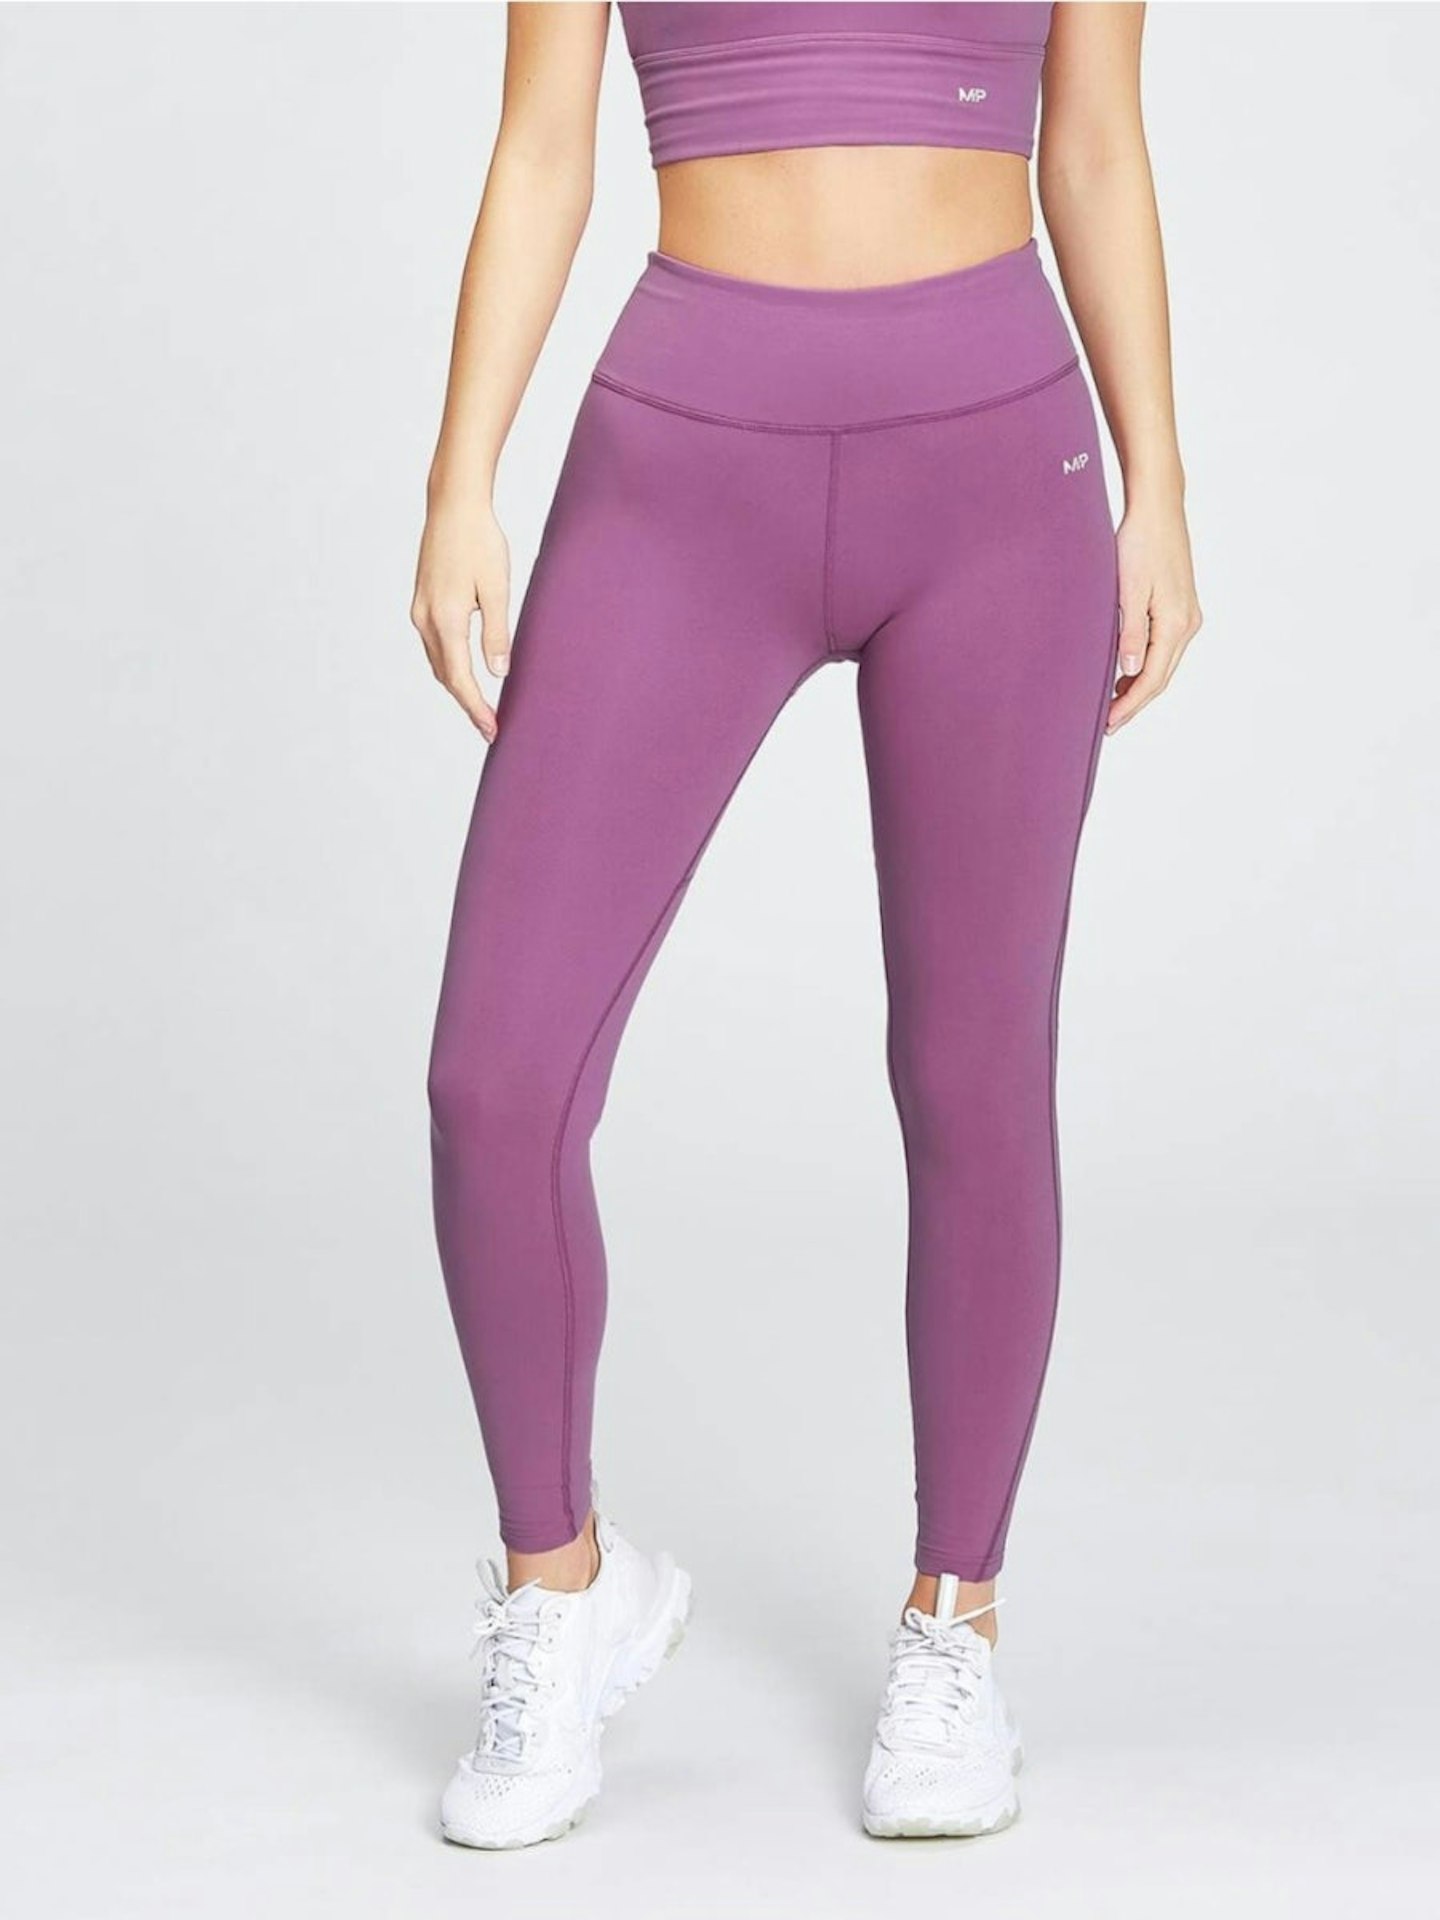 The Lululemon Dupes Your Fitness Wardrobe Is Missing